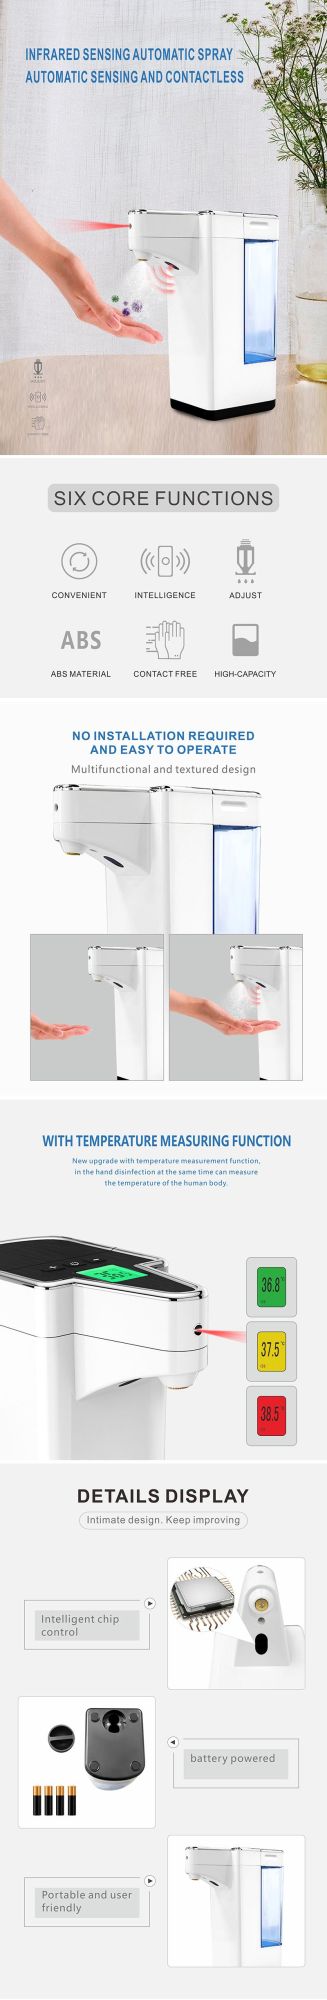 Luxury Infrared Induction Spray Large Capacity and Durable Electric Automatic Foam Soap Dispenser